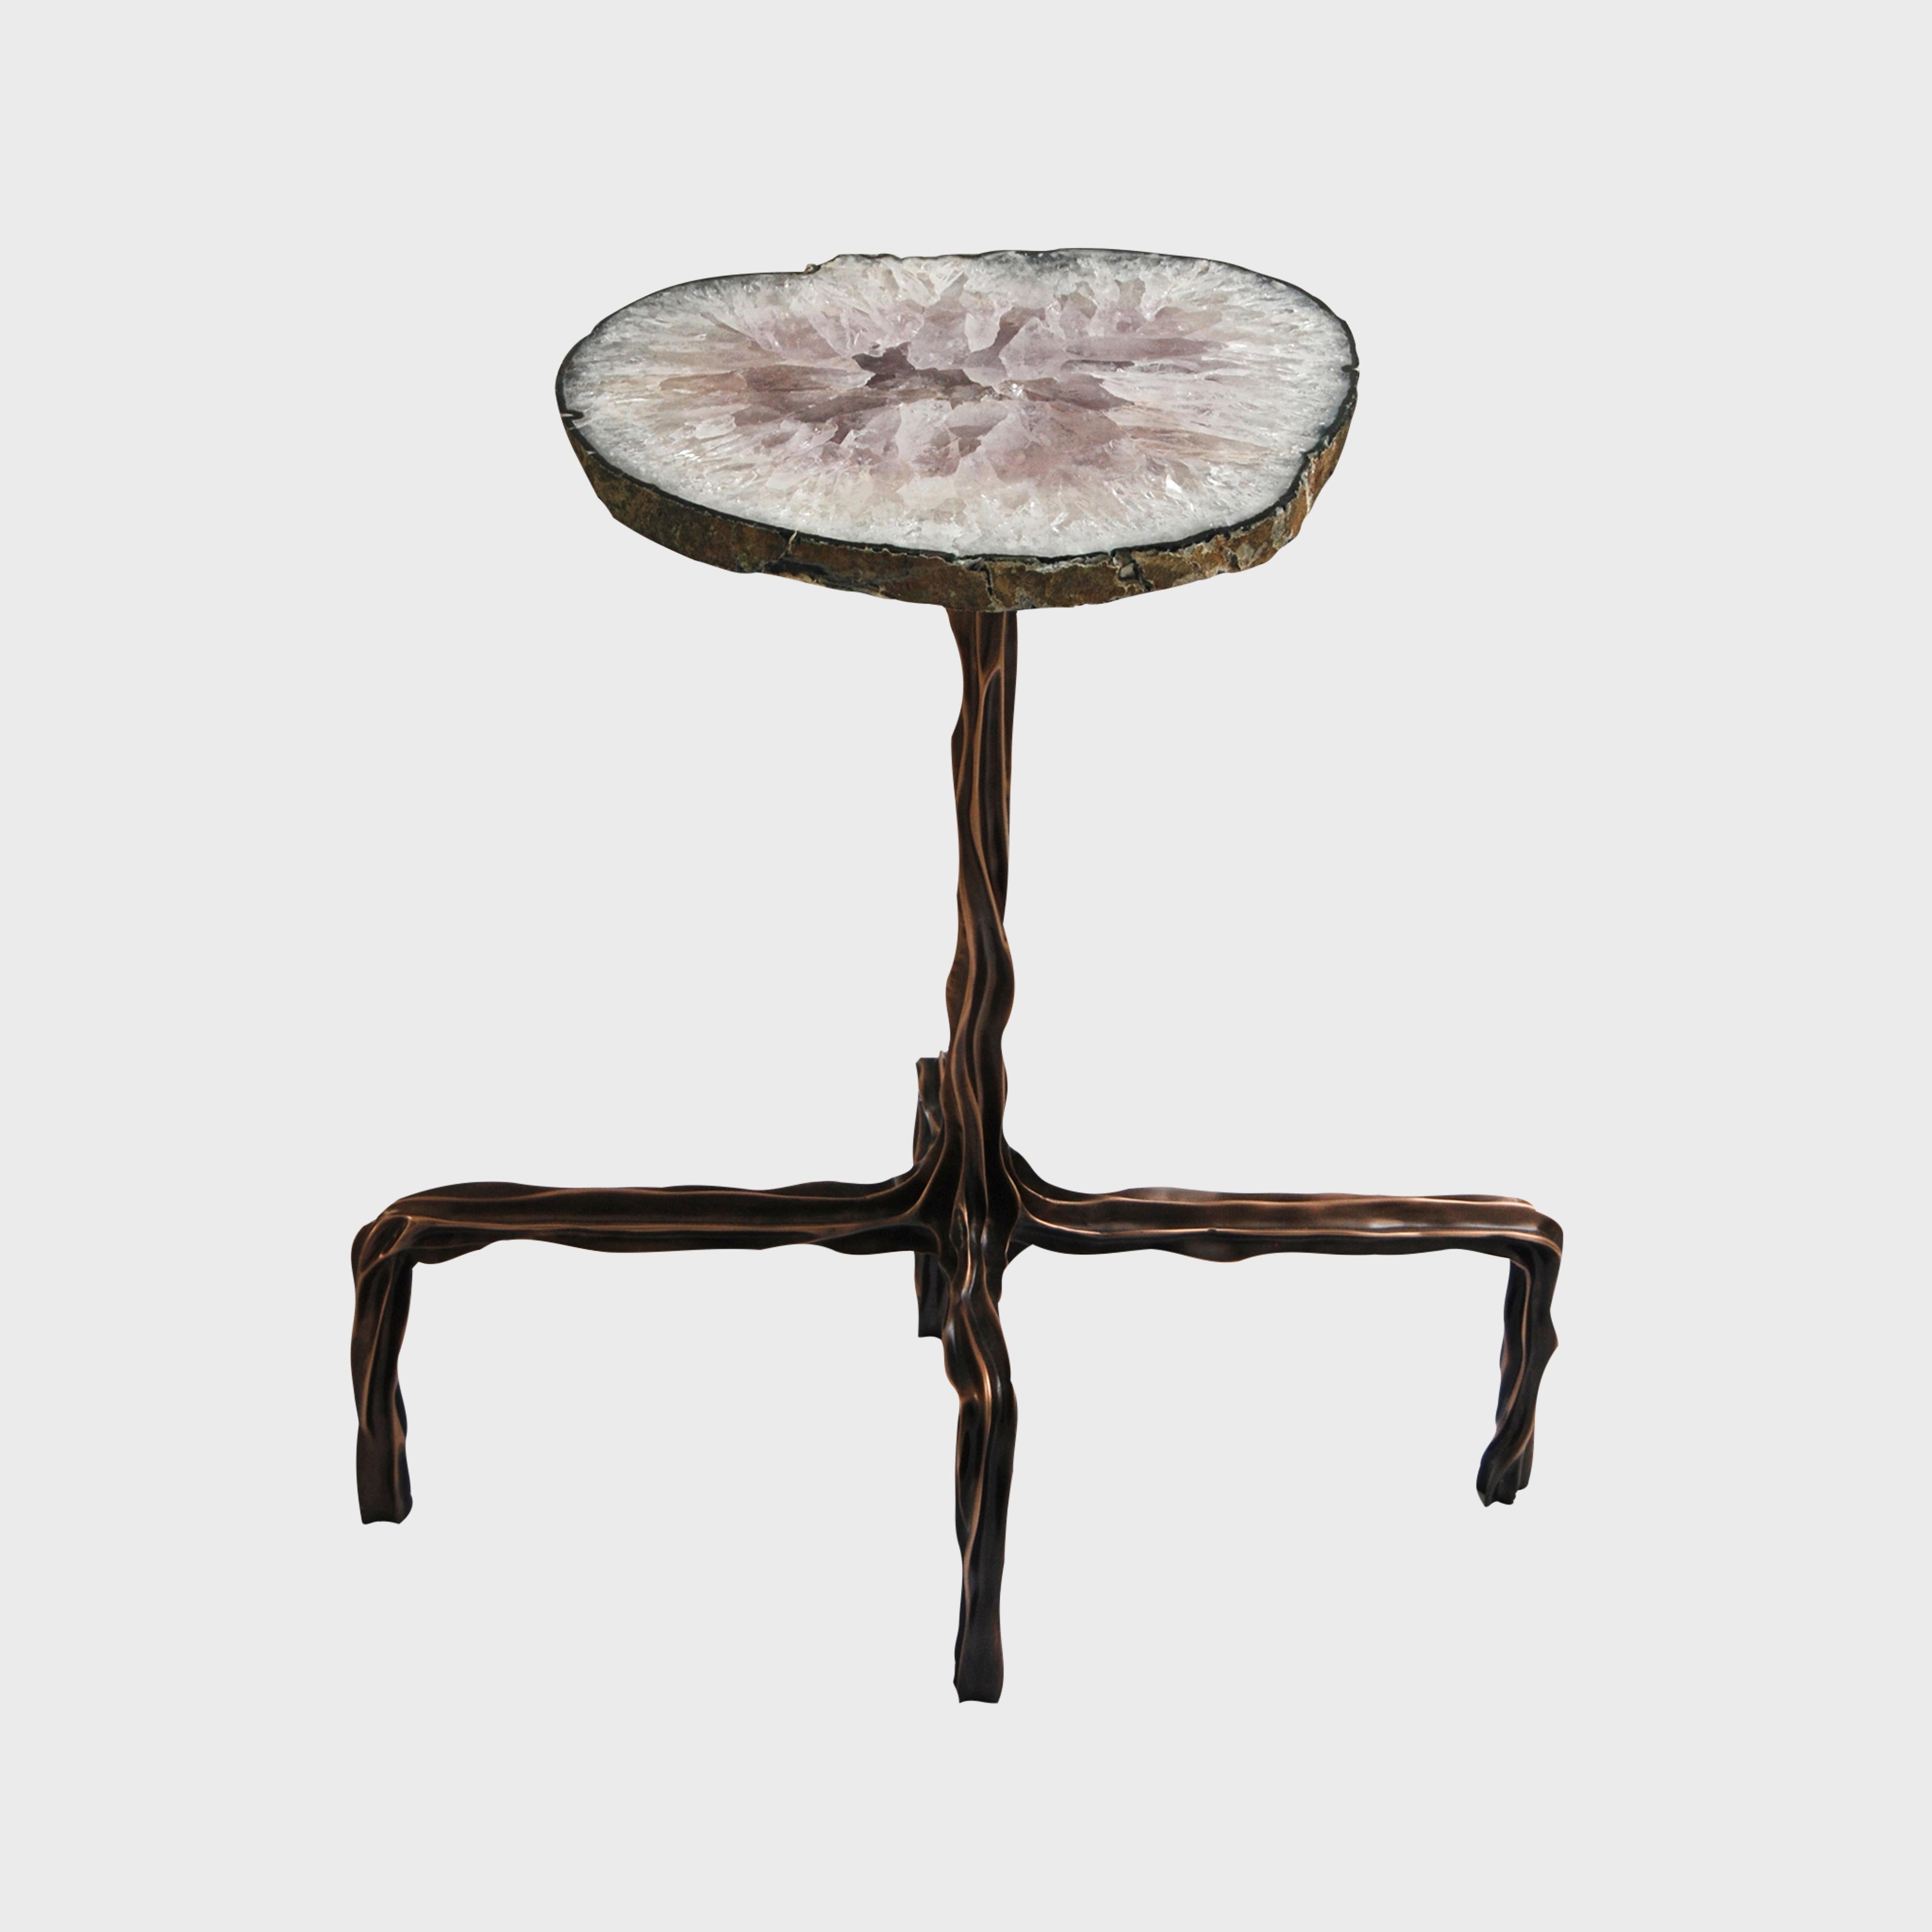 Cast in bronze from the artist's hand molded form, each Milla coctail table is made to order and hand finished. Stone tabletop finish options are available. Design by Fakasaka.